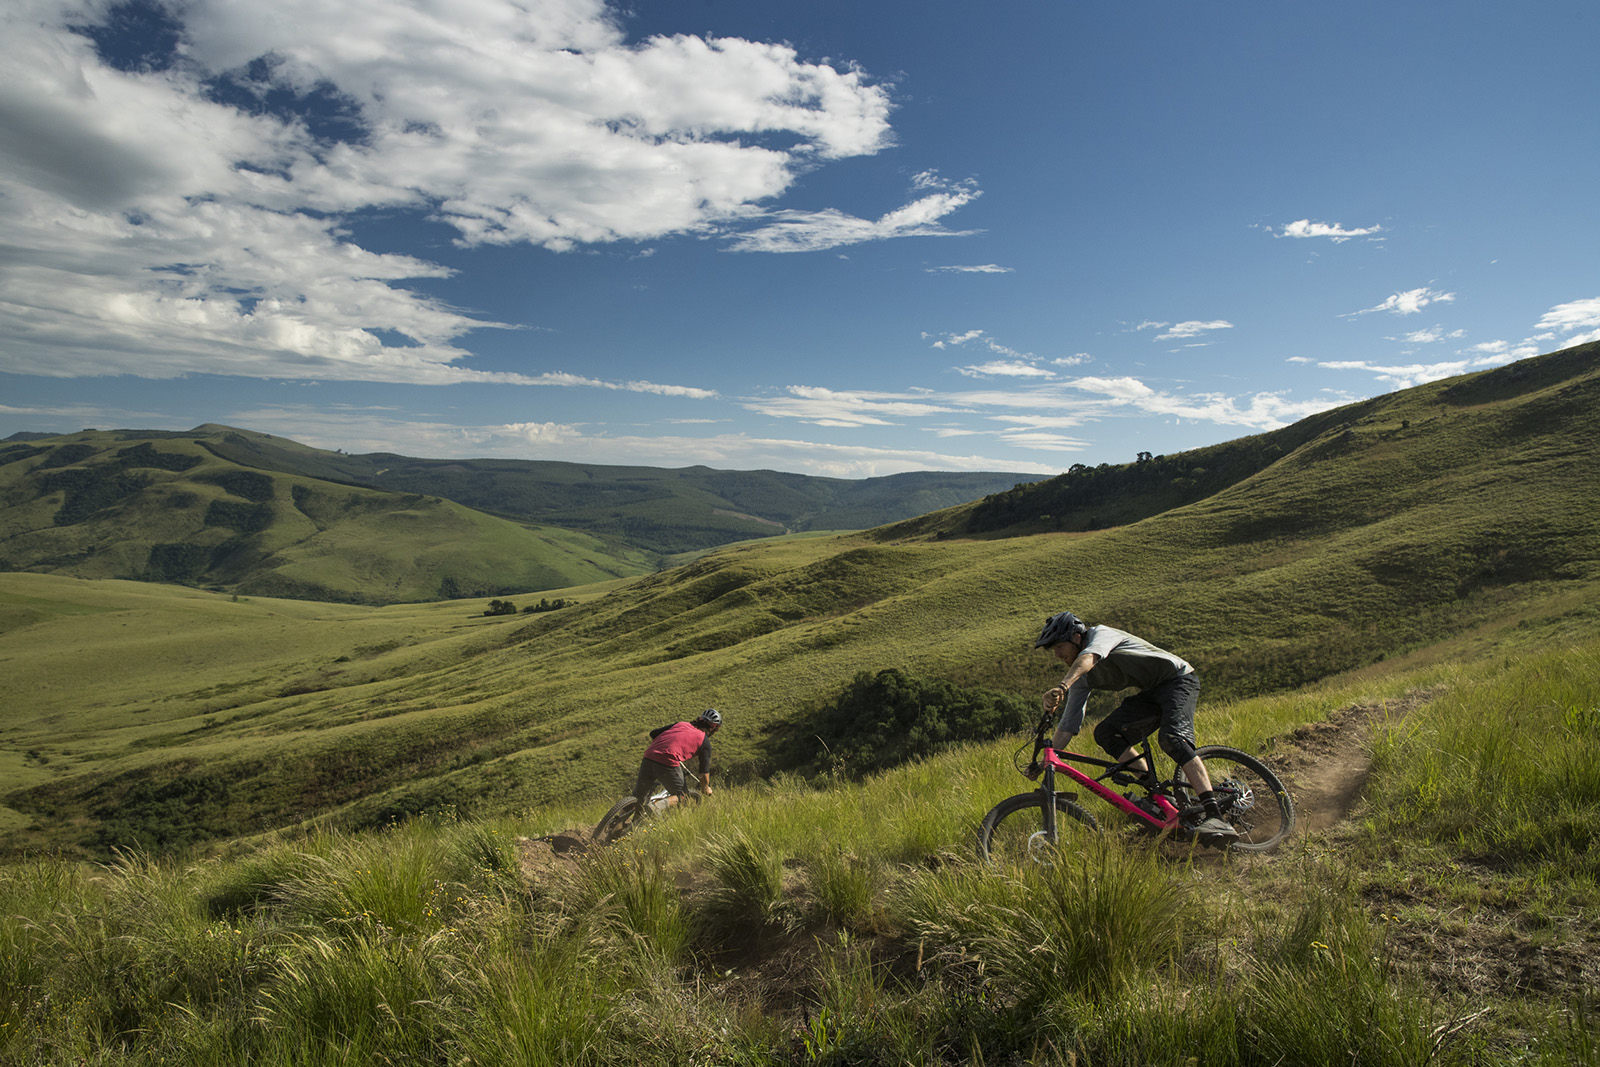 Matt Hunter with locals Hylton Turvey and Fanie Kok riding in the trails of Karkloof and Drakensberg in South Africa.